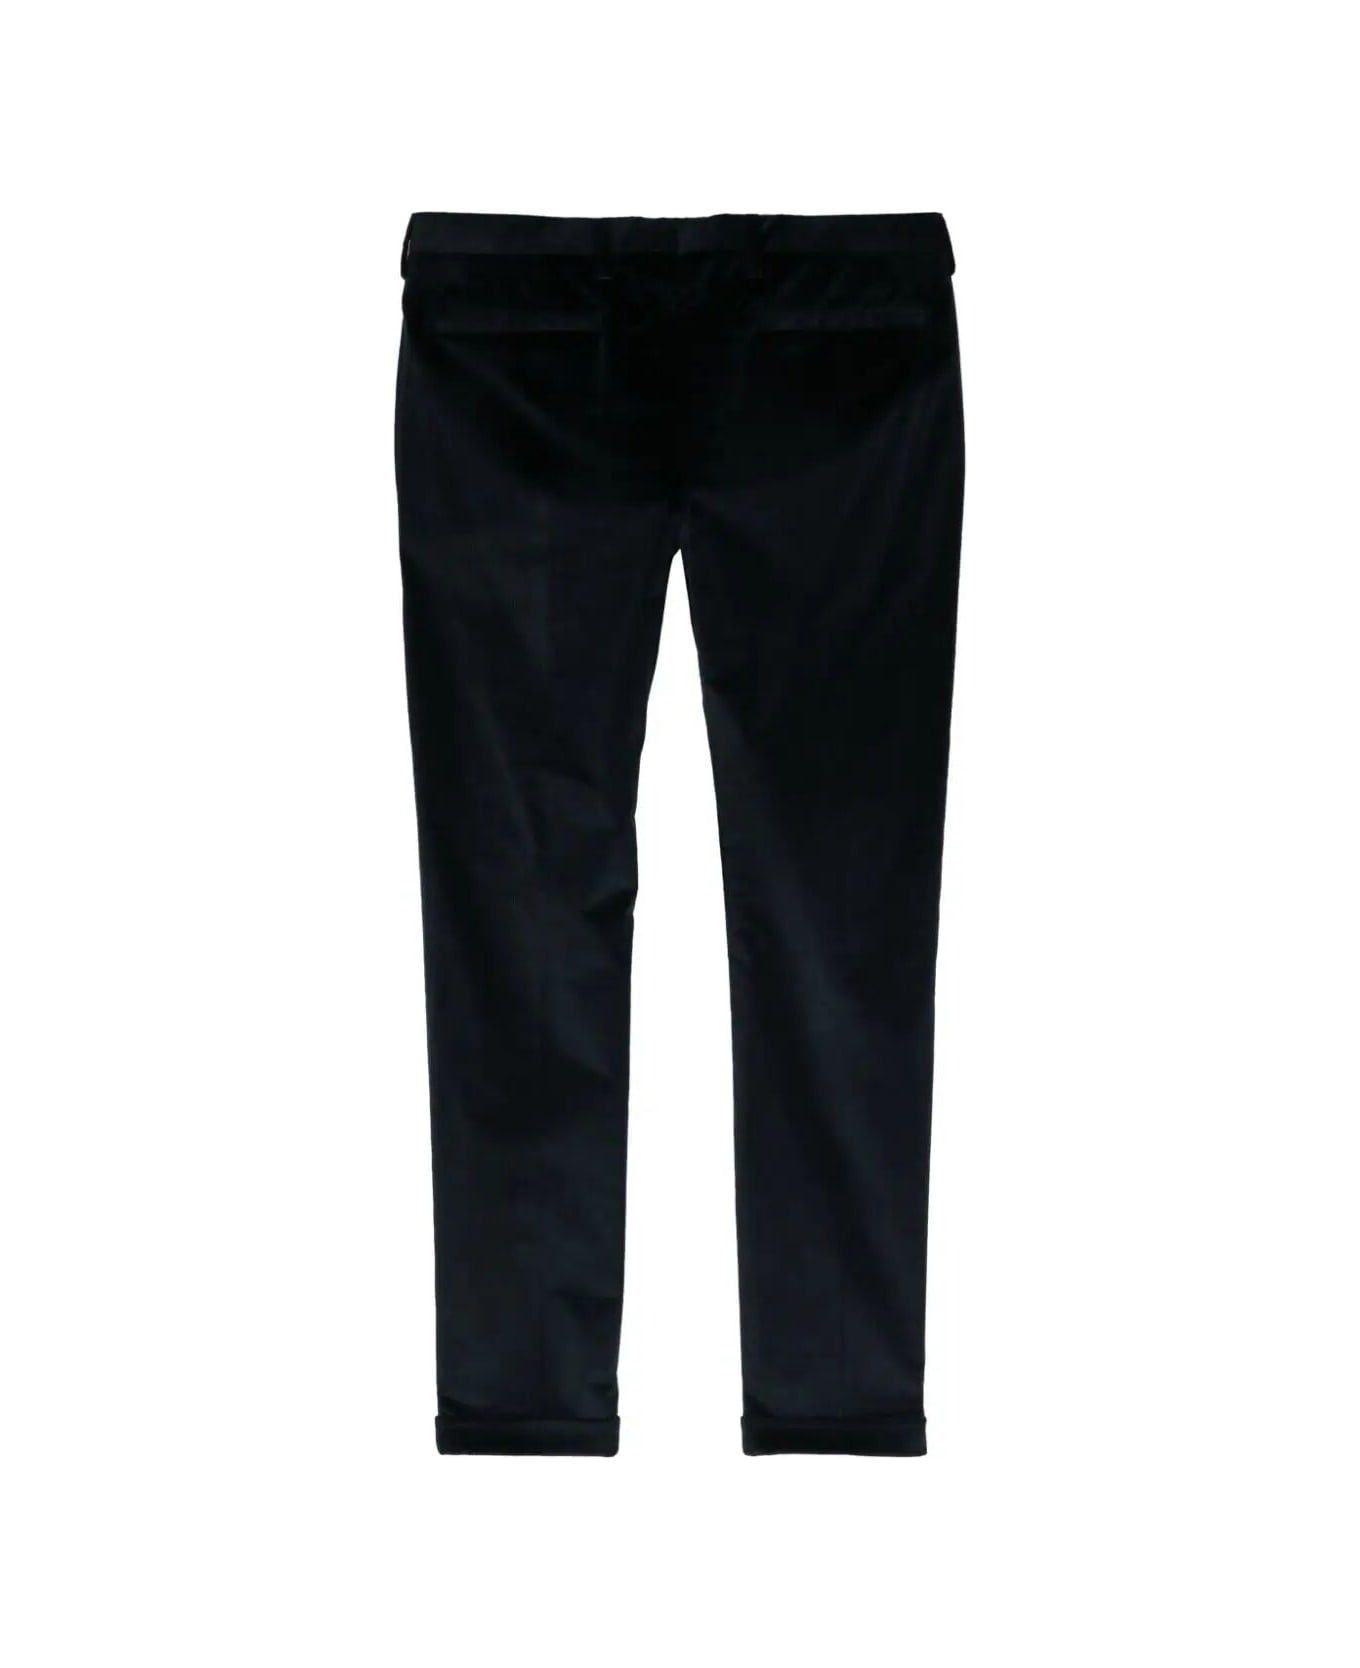 Paul Smith Mens Trousers - Navy